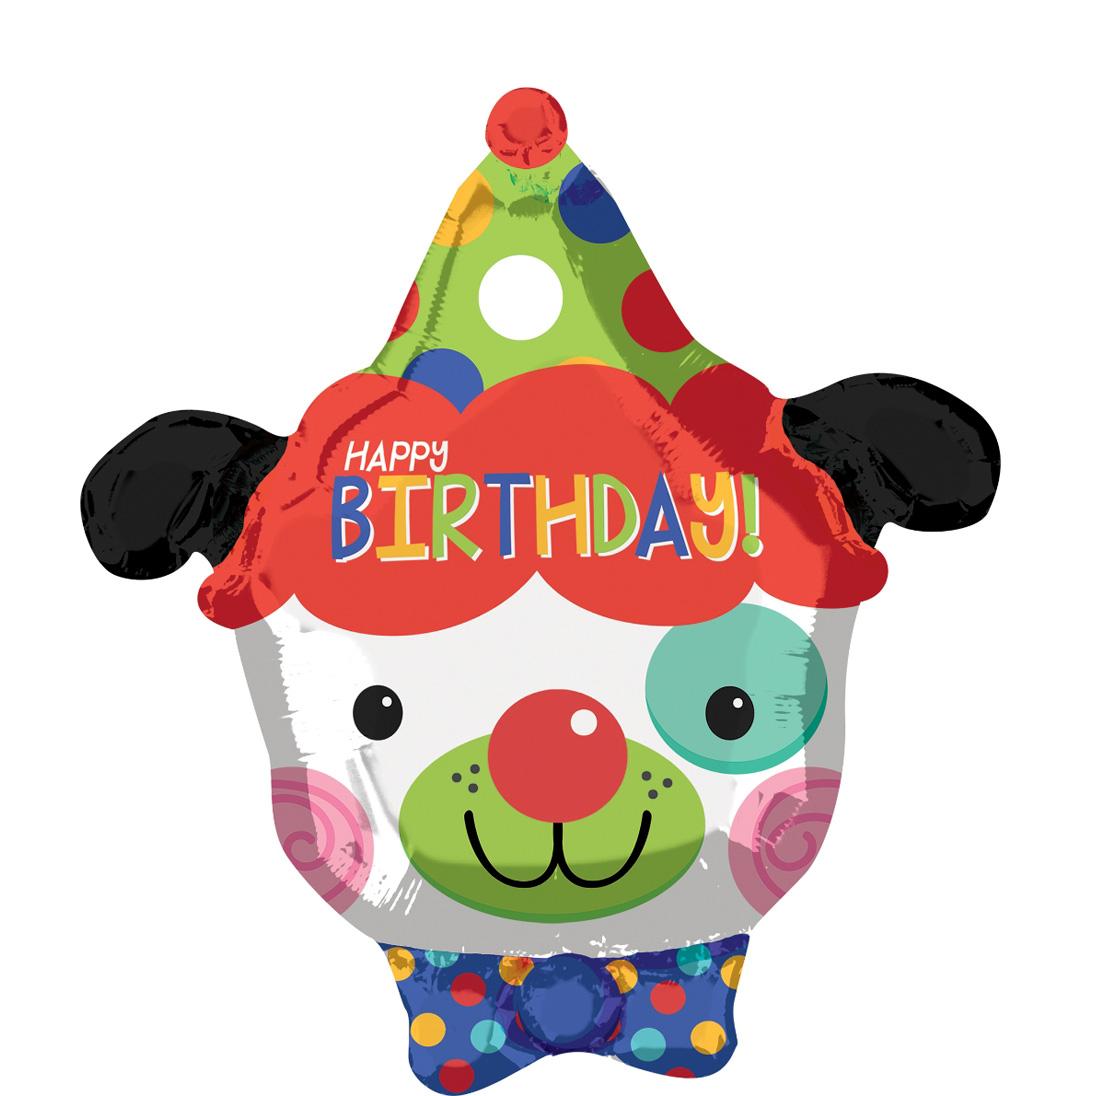 Happy Birthday Clown Dog Junior Shape 45x50cm Balloons & Streamers - Party Centre - Party Centre